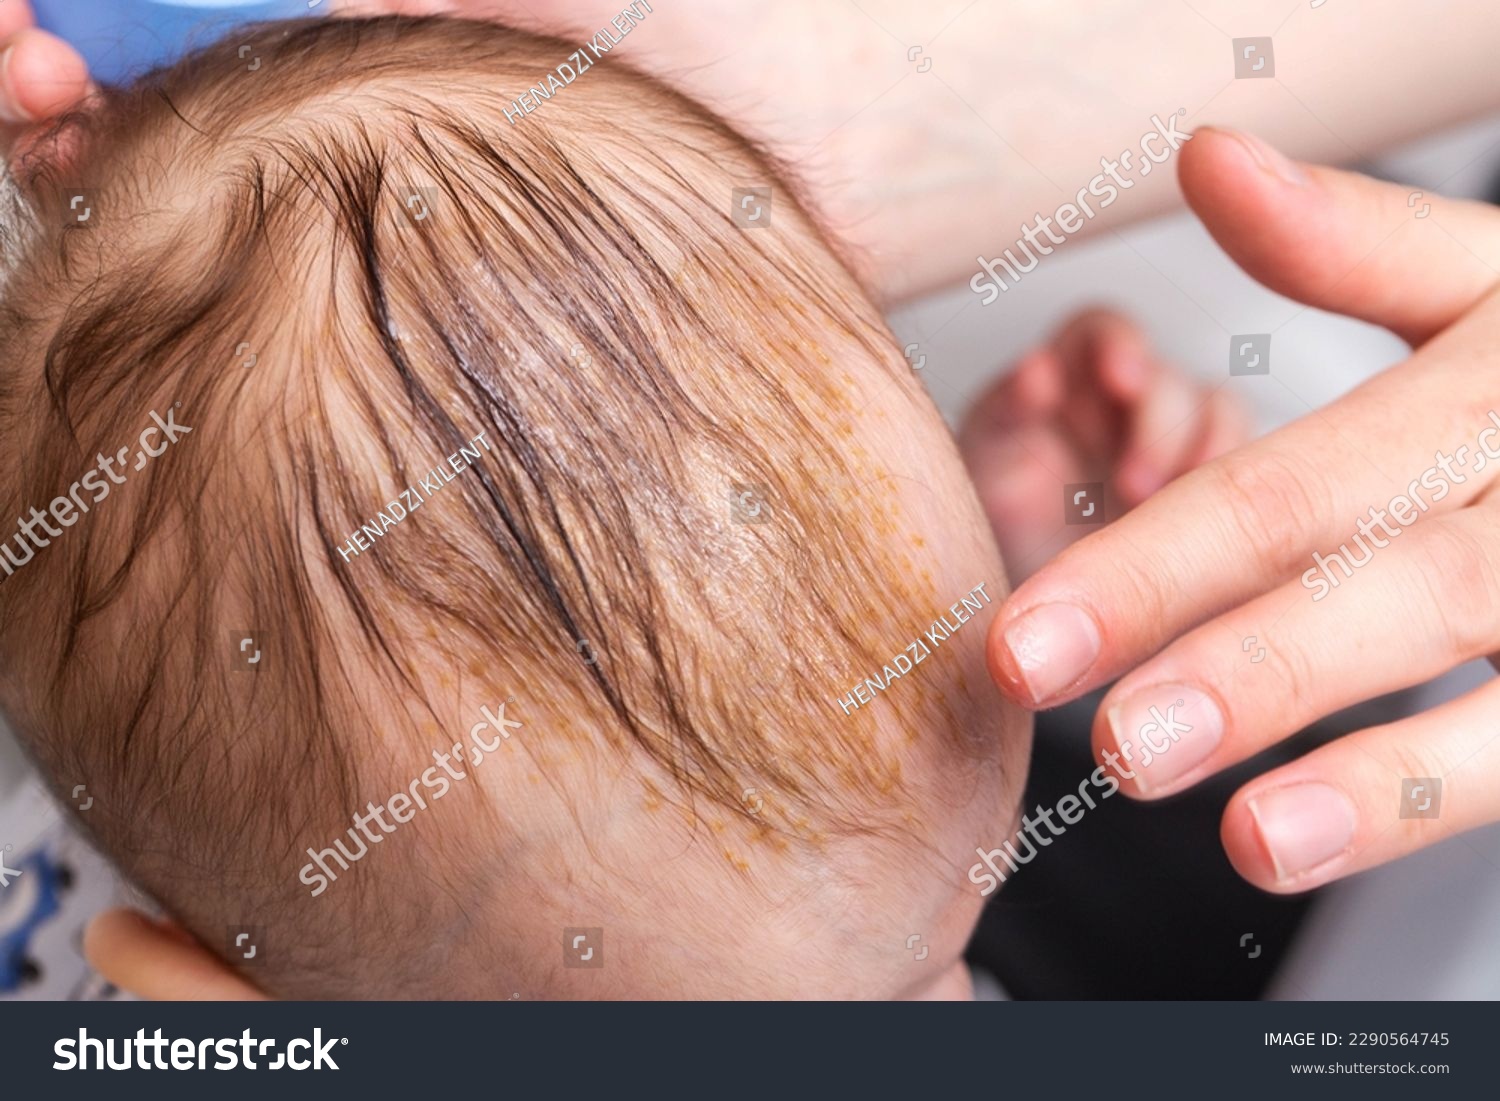 Smearing a seborrheic crust with baby oil on a child's head. Combing and removal of seborrheic crust, close-up #2290564745